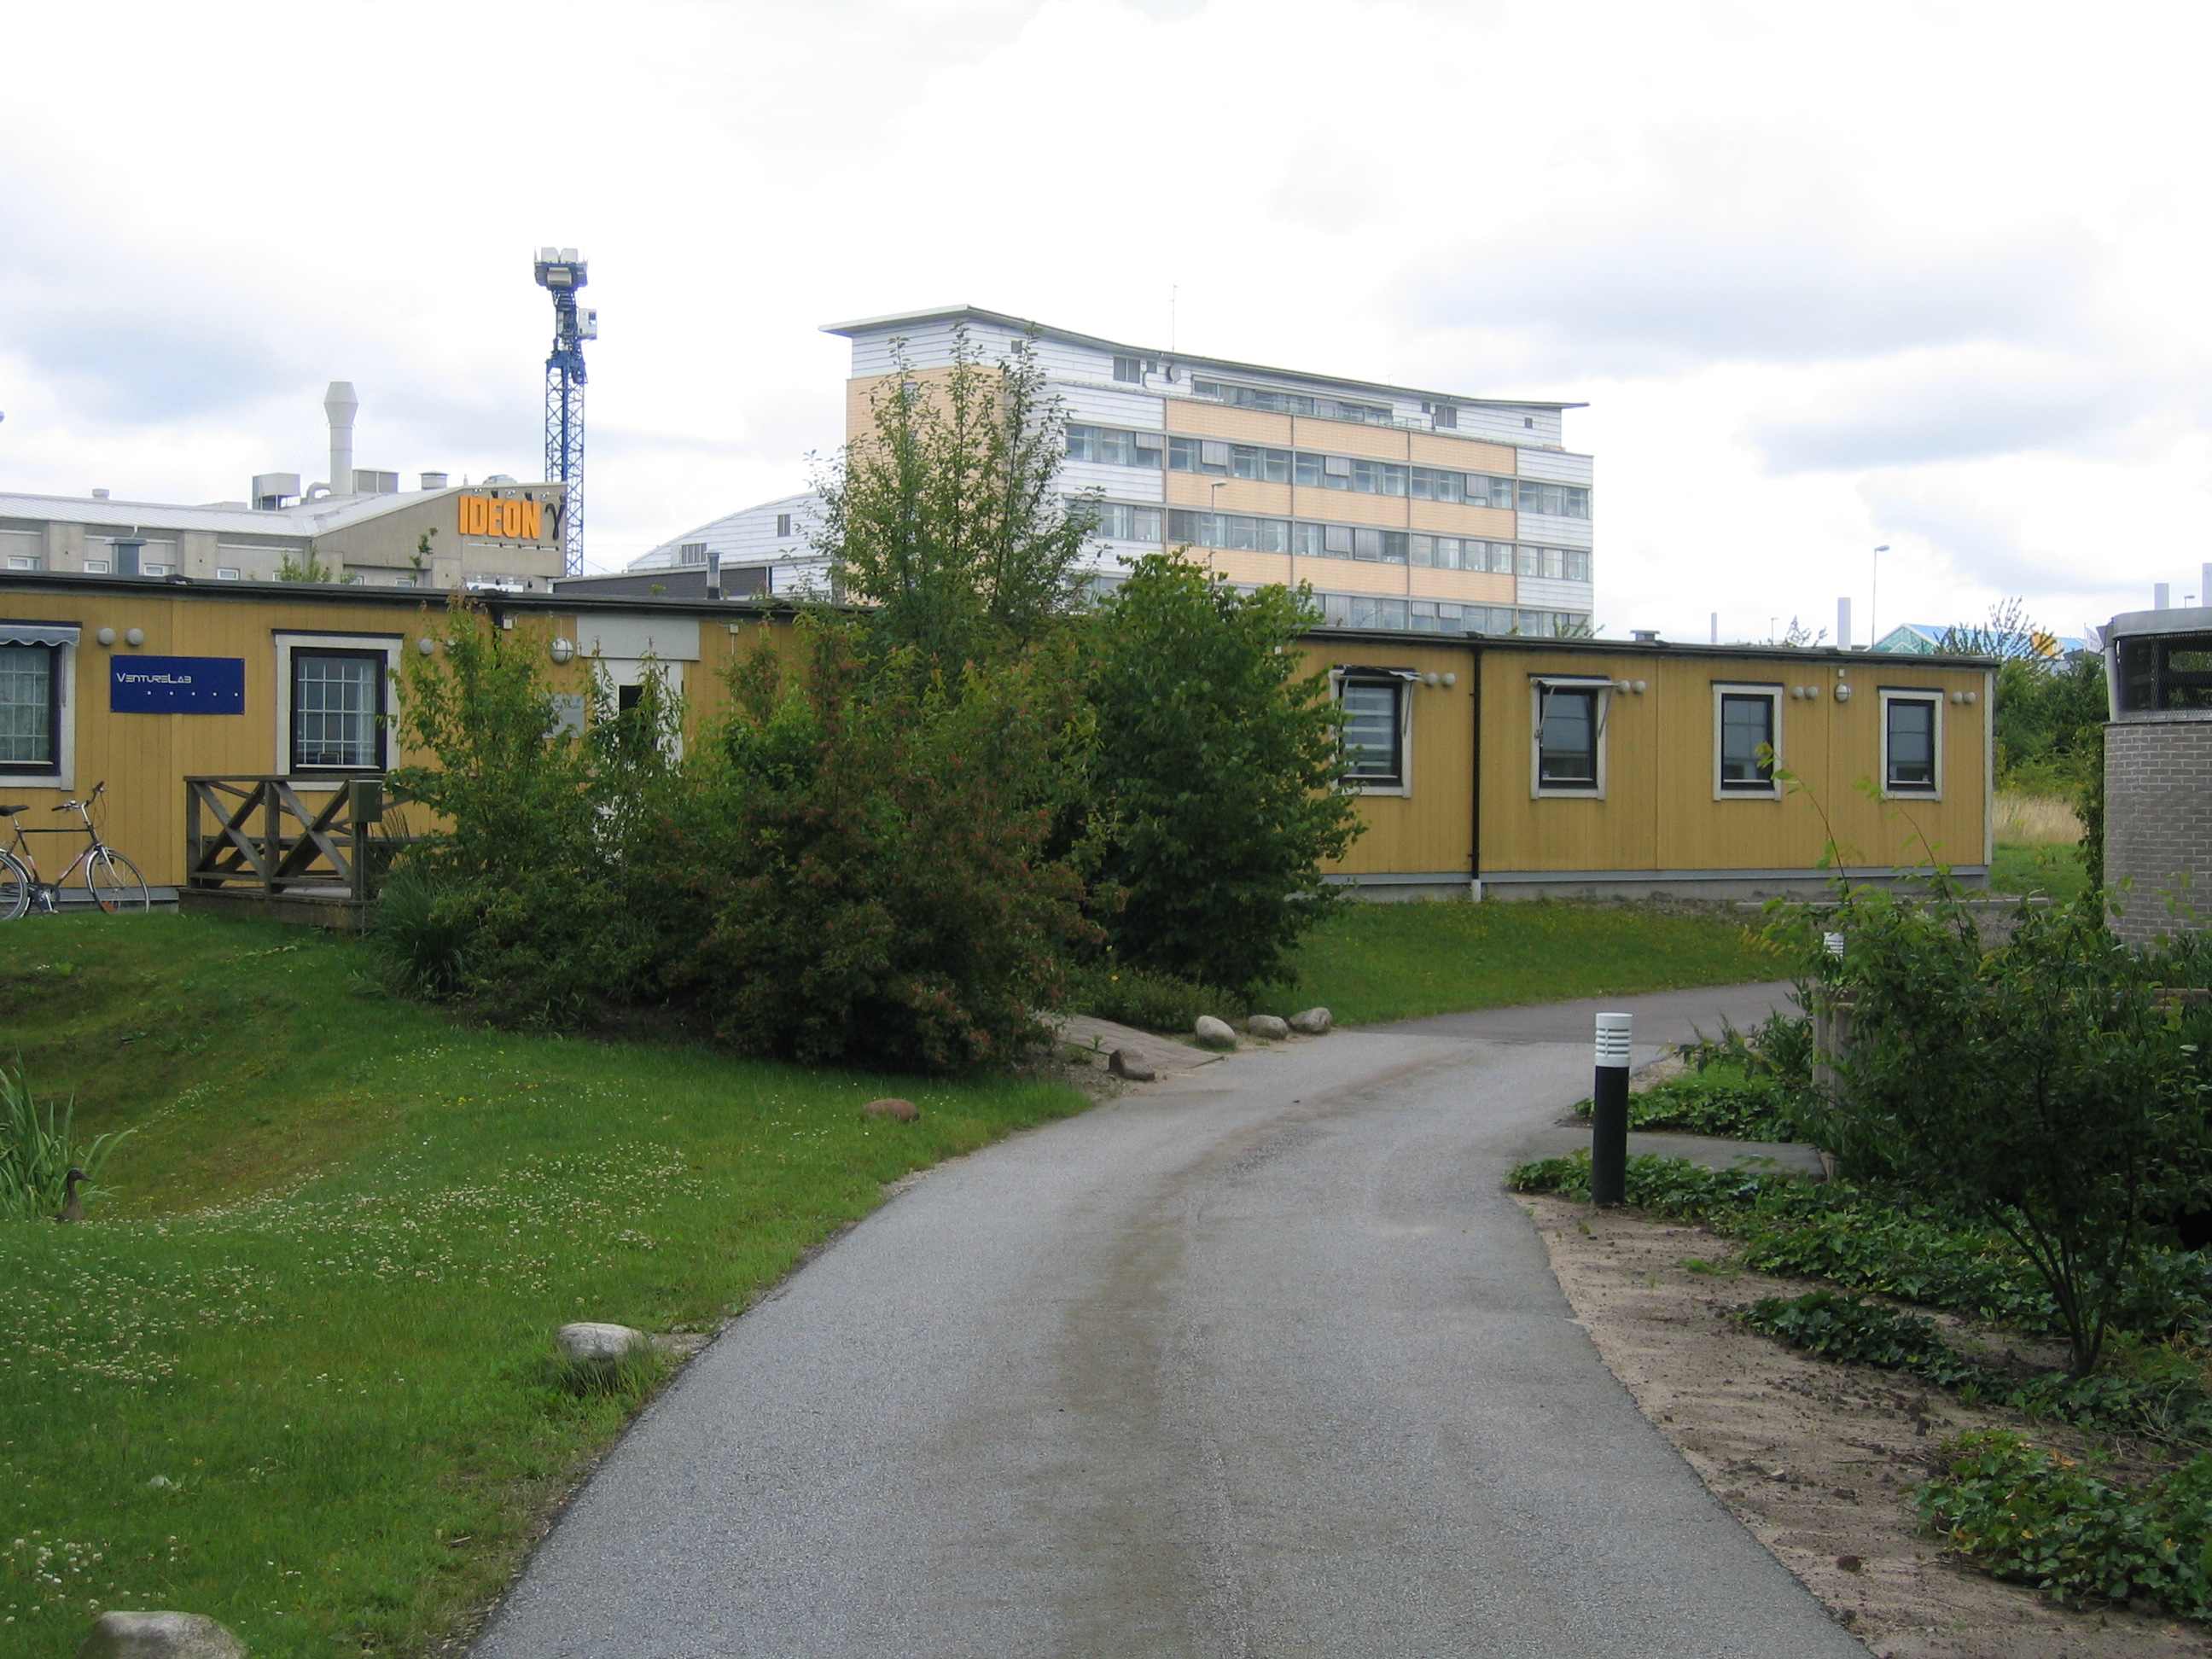 A picture of the VentureLab offices as seen from the outside, showing a one-story yellow building with a taller building in the background.